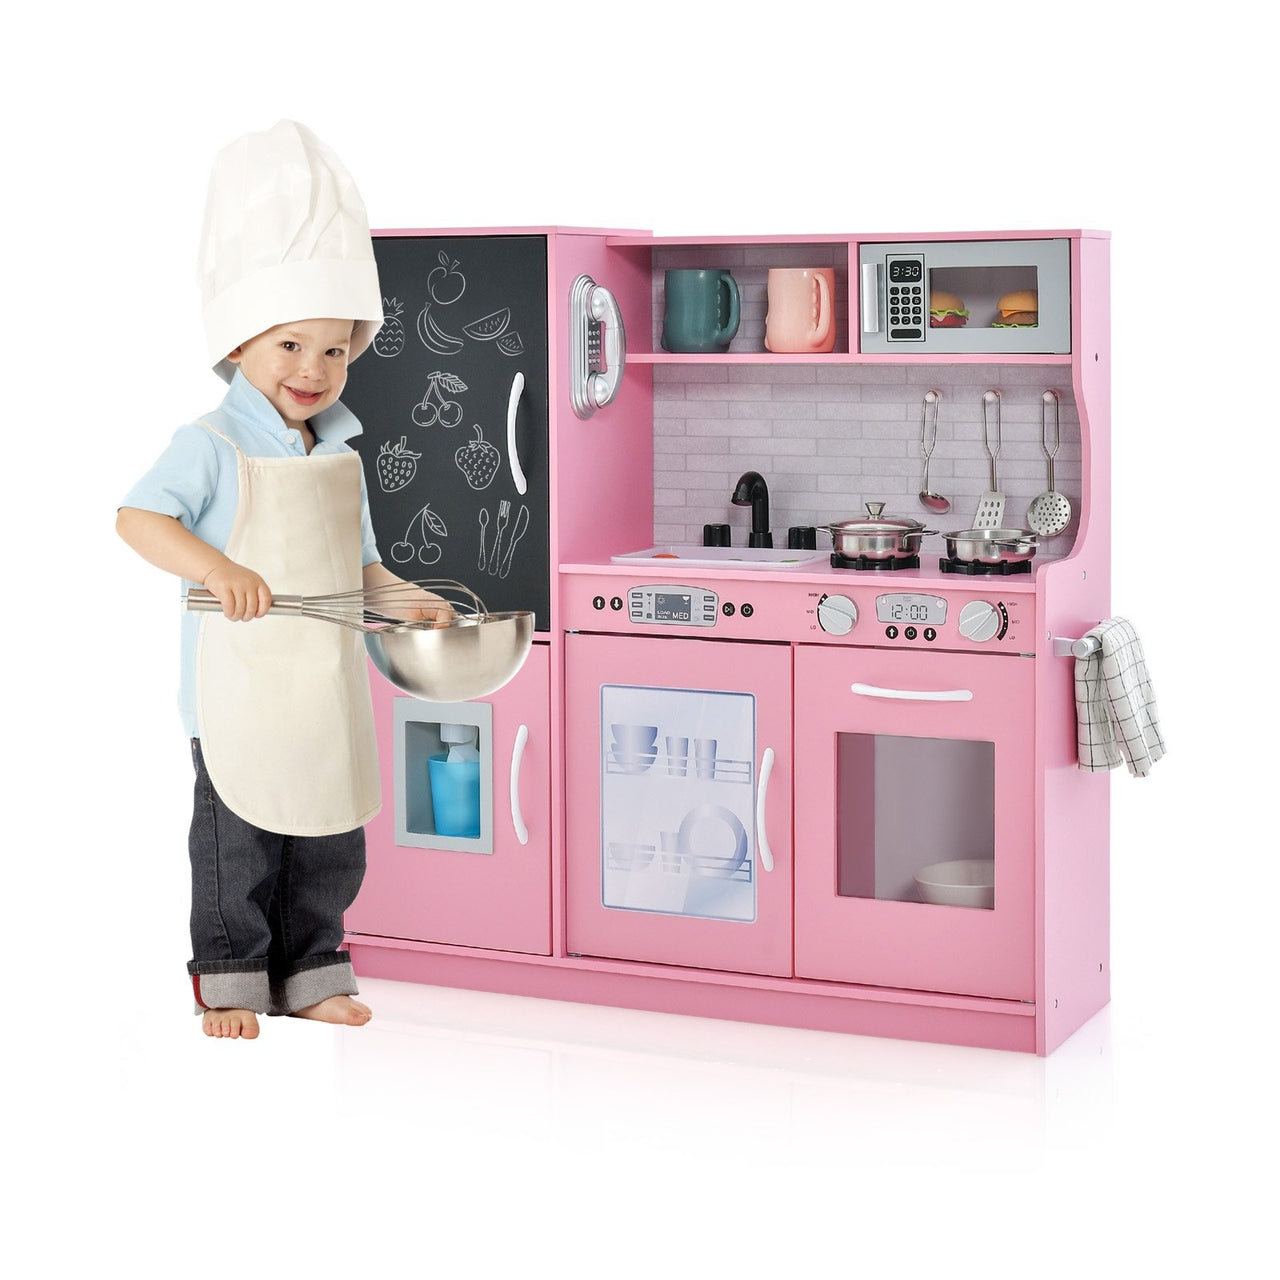 Toddler Pretend Play Kitchen for Boys and Girls 3-6 Years Old - Gallery View 1 of 10